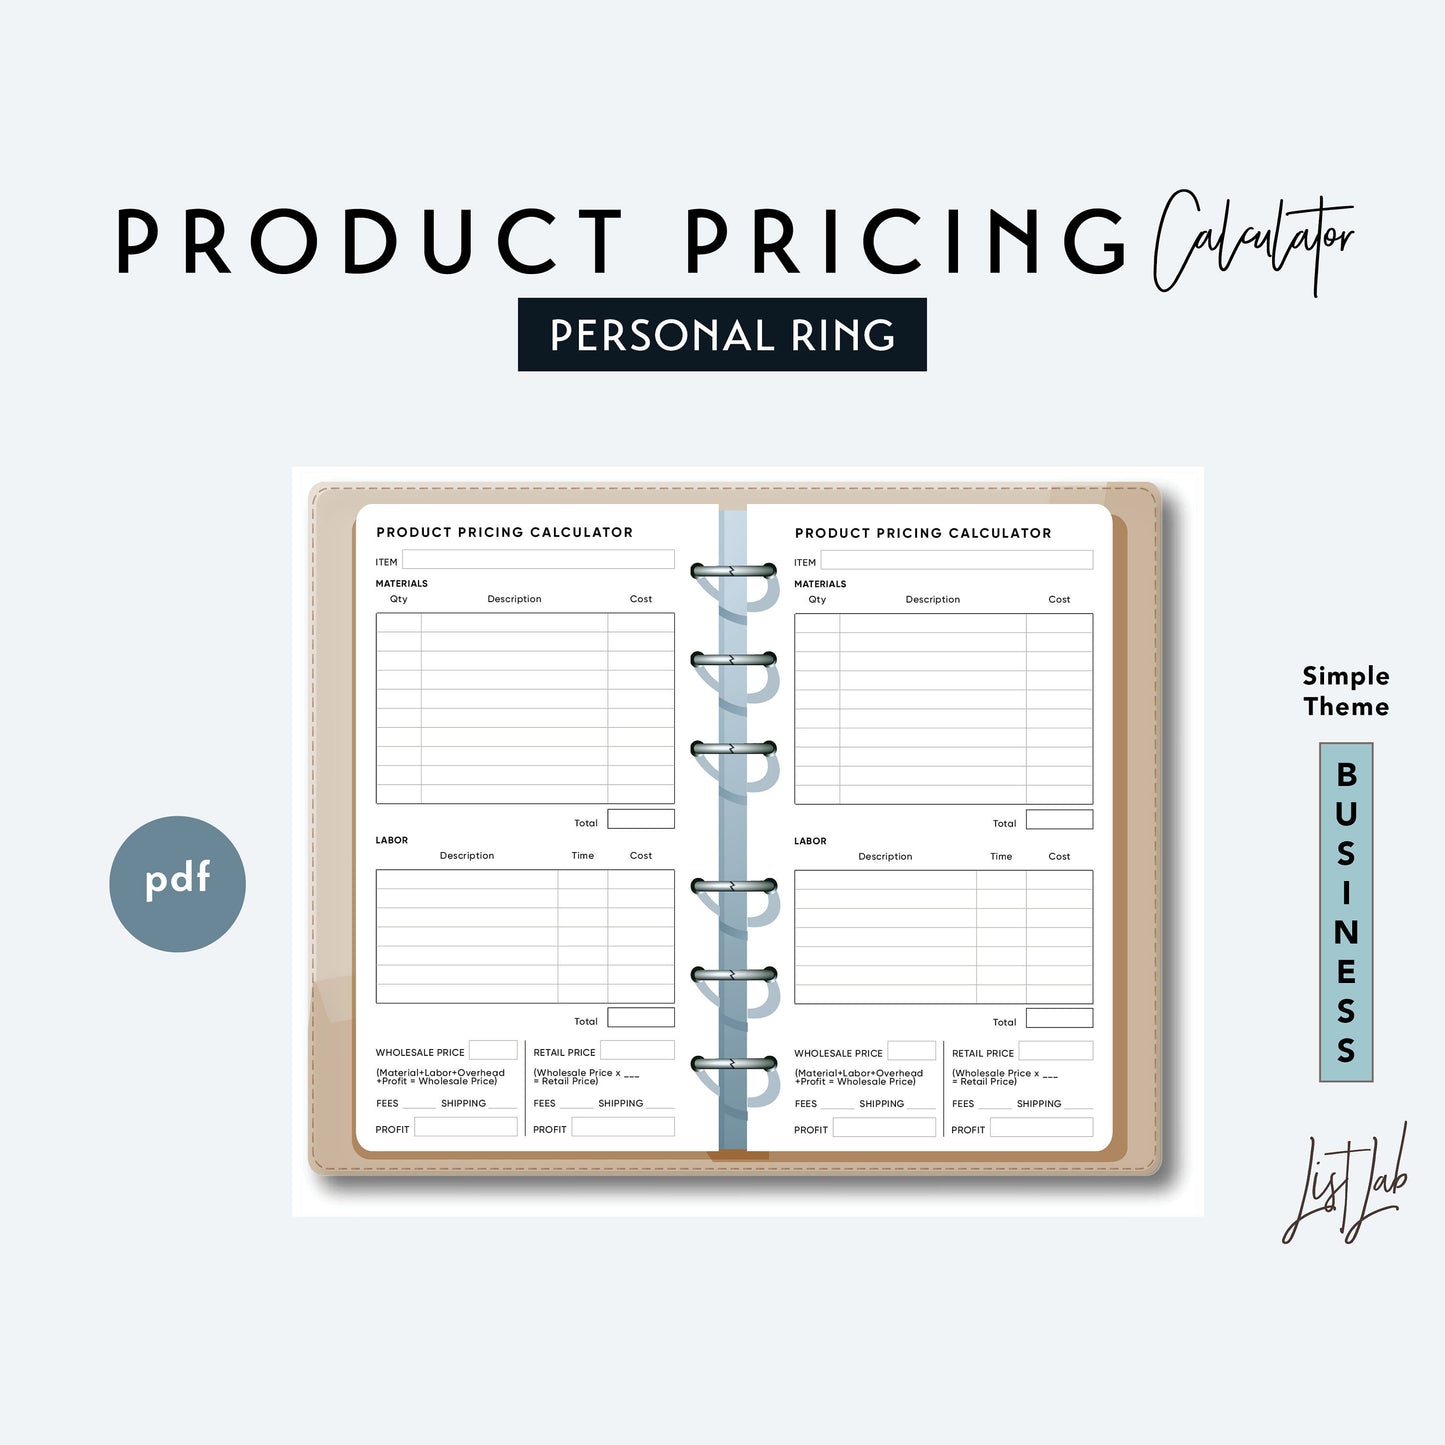 Personal Ring PRODUCT PRICING CALCULATOR Printable Insert Set